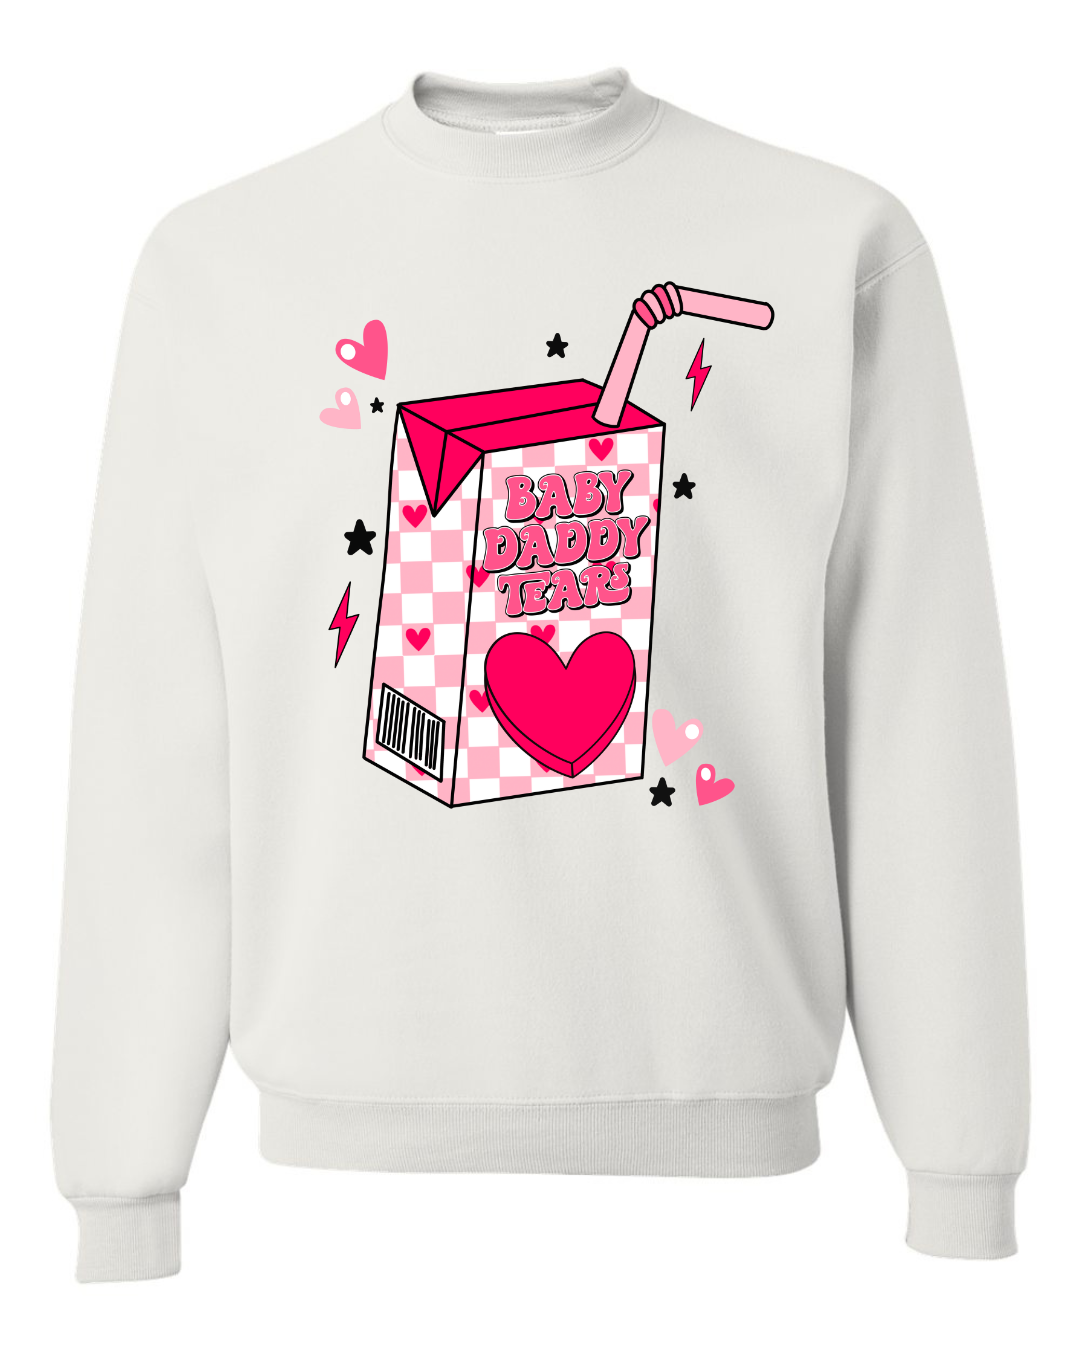 Baby Daddy Tears Valentines Adult Crewneck Pullover